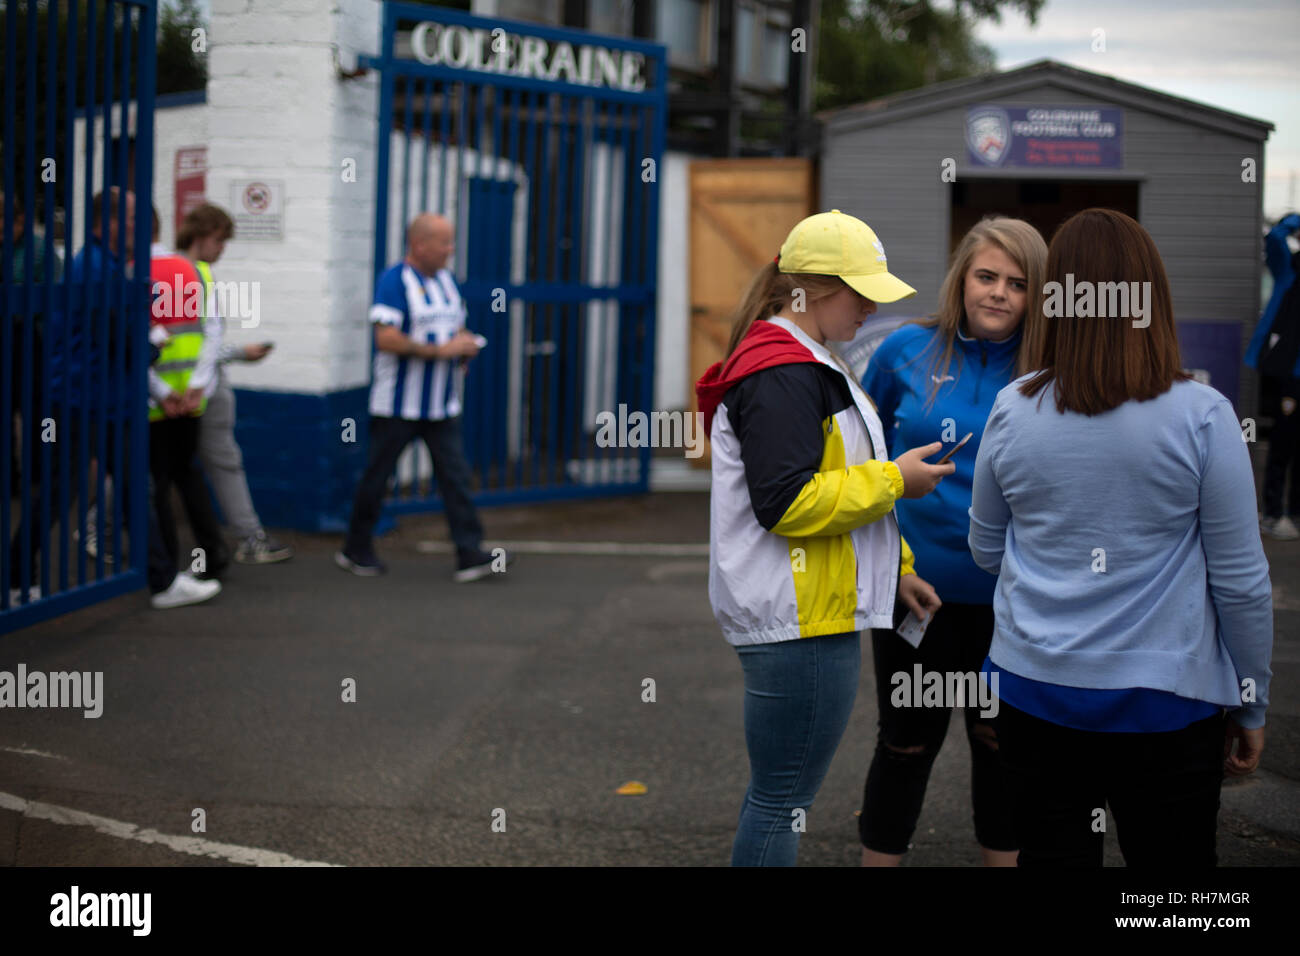 Home supporters arriving at the stadium before Coleraine played Spartak Subotica of Serbia in a Europa League Qualifying First Round second leg at the Showgrounds, Coleraine. The hosts from Northern Ireland had drawn the away leg 1-1 the previous week, however, the visitors won the return leg 2-0 to progress to face Sparta Prague in the next round, watched by a sell-out crowd of 1700. Stock Photo